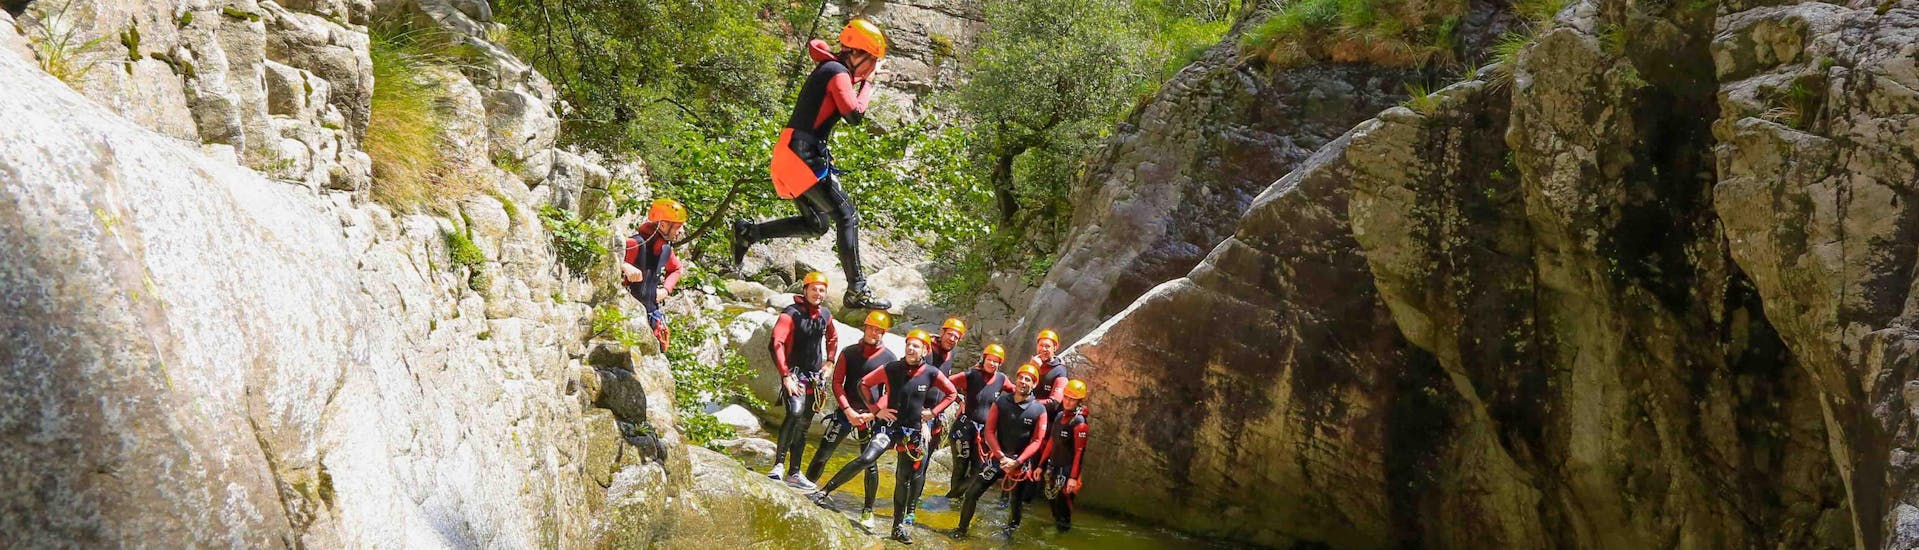 A tourist is jumping in the Zoicu canyon during his activity canyoning Wild with reves de cimes.